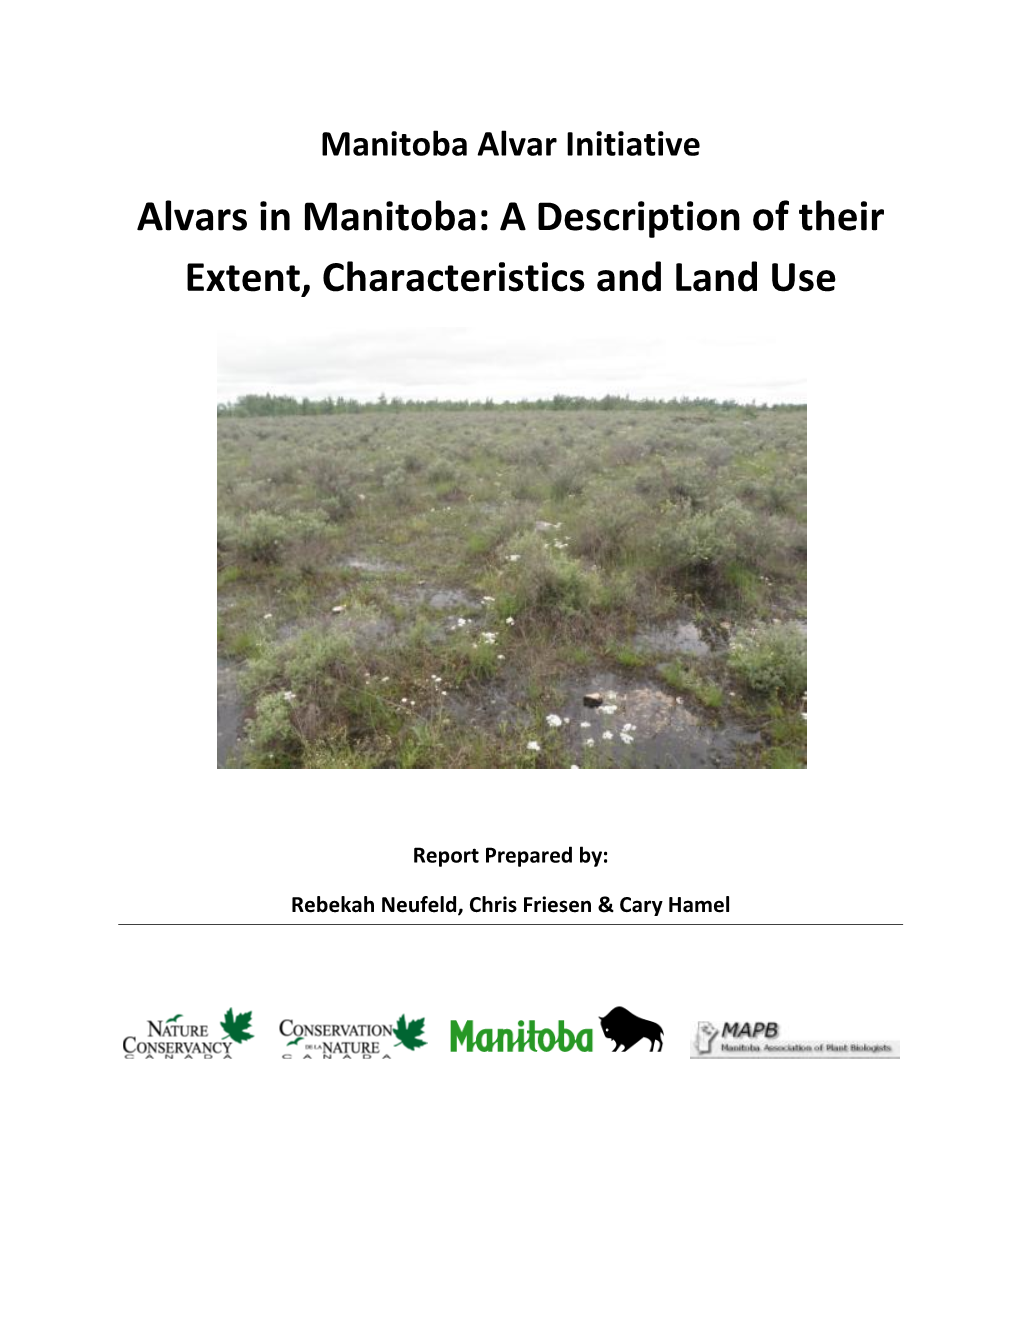 Alvars in Manitoba: a Description of Their Extent, Characteristics and Land Use